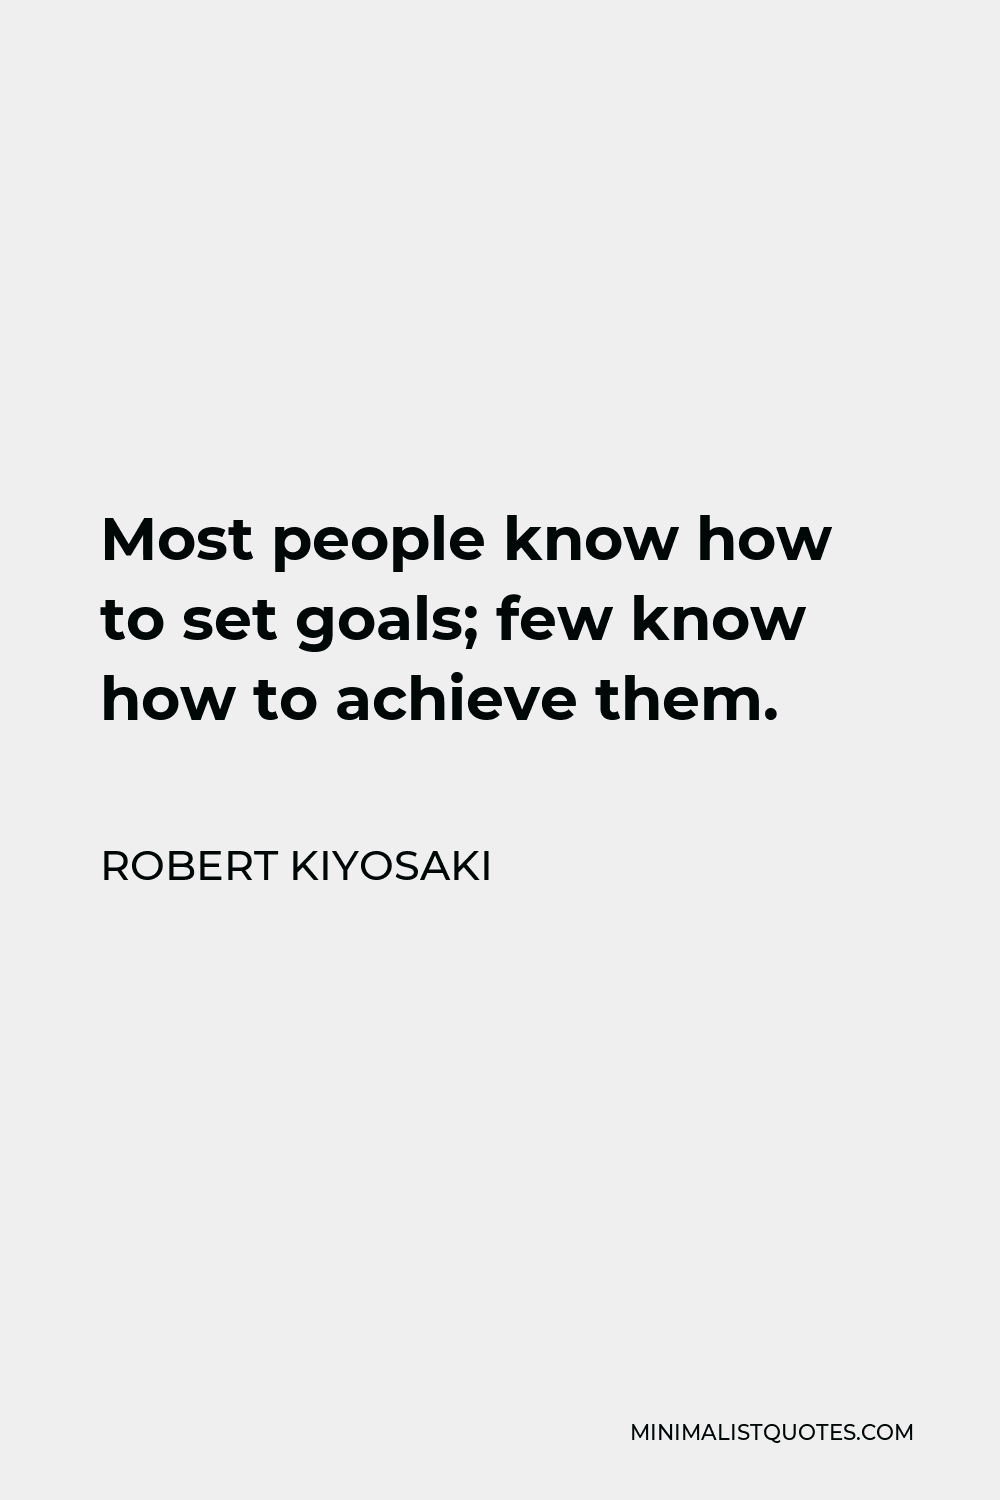 Robert Kiyosaki Quote - Most people know how to set goals; few know how to achieve them.